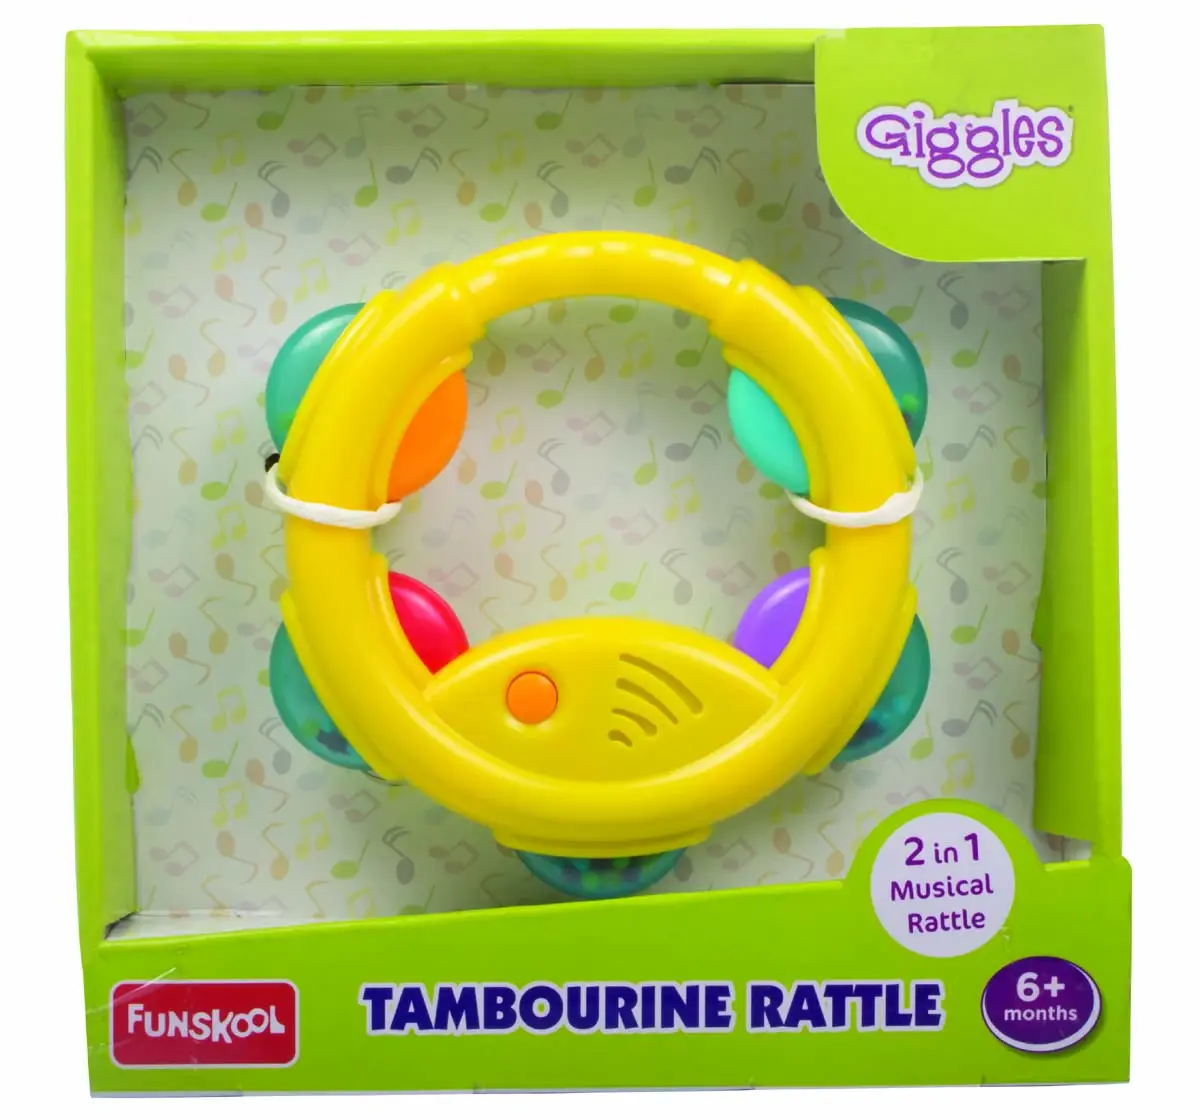 Giggles Tambourine Rattle New Born for Kids Age 3M+